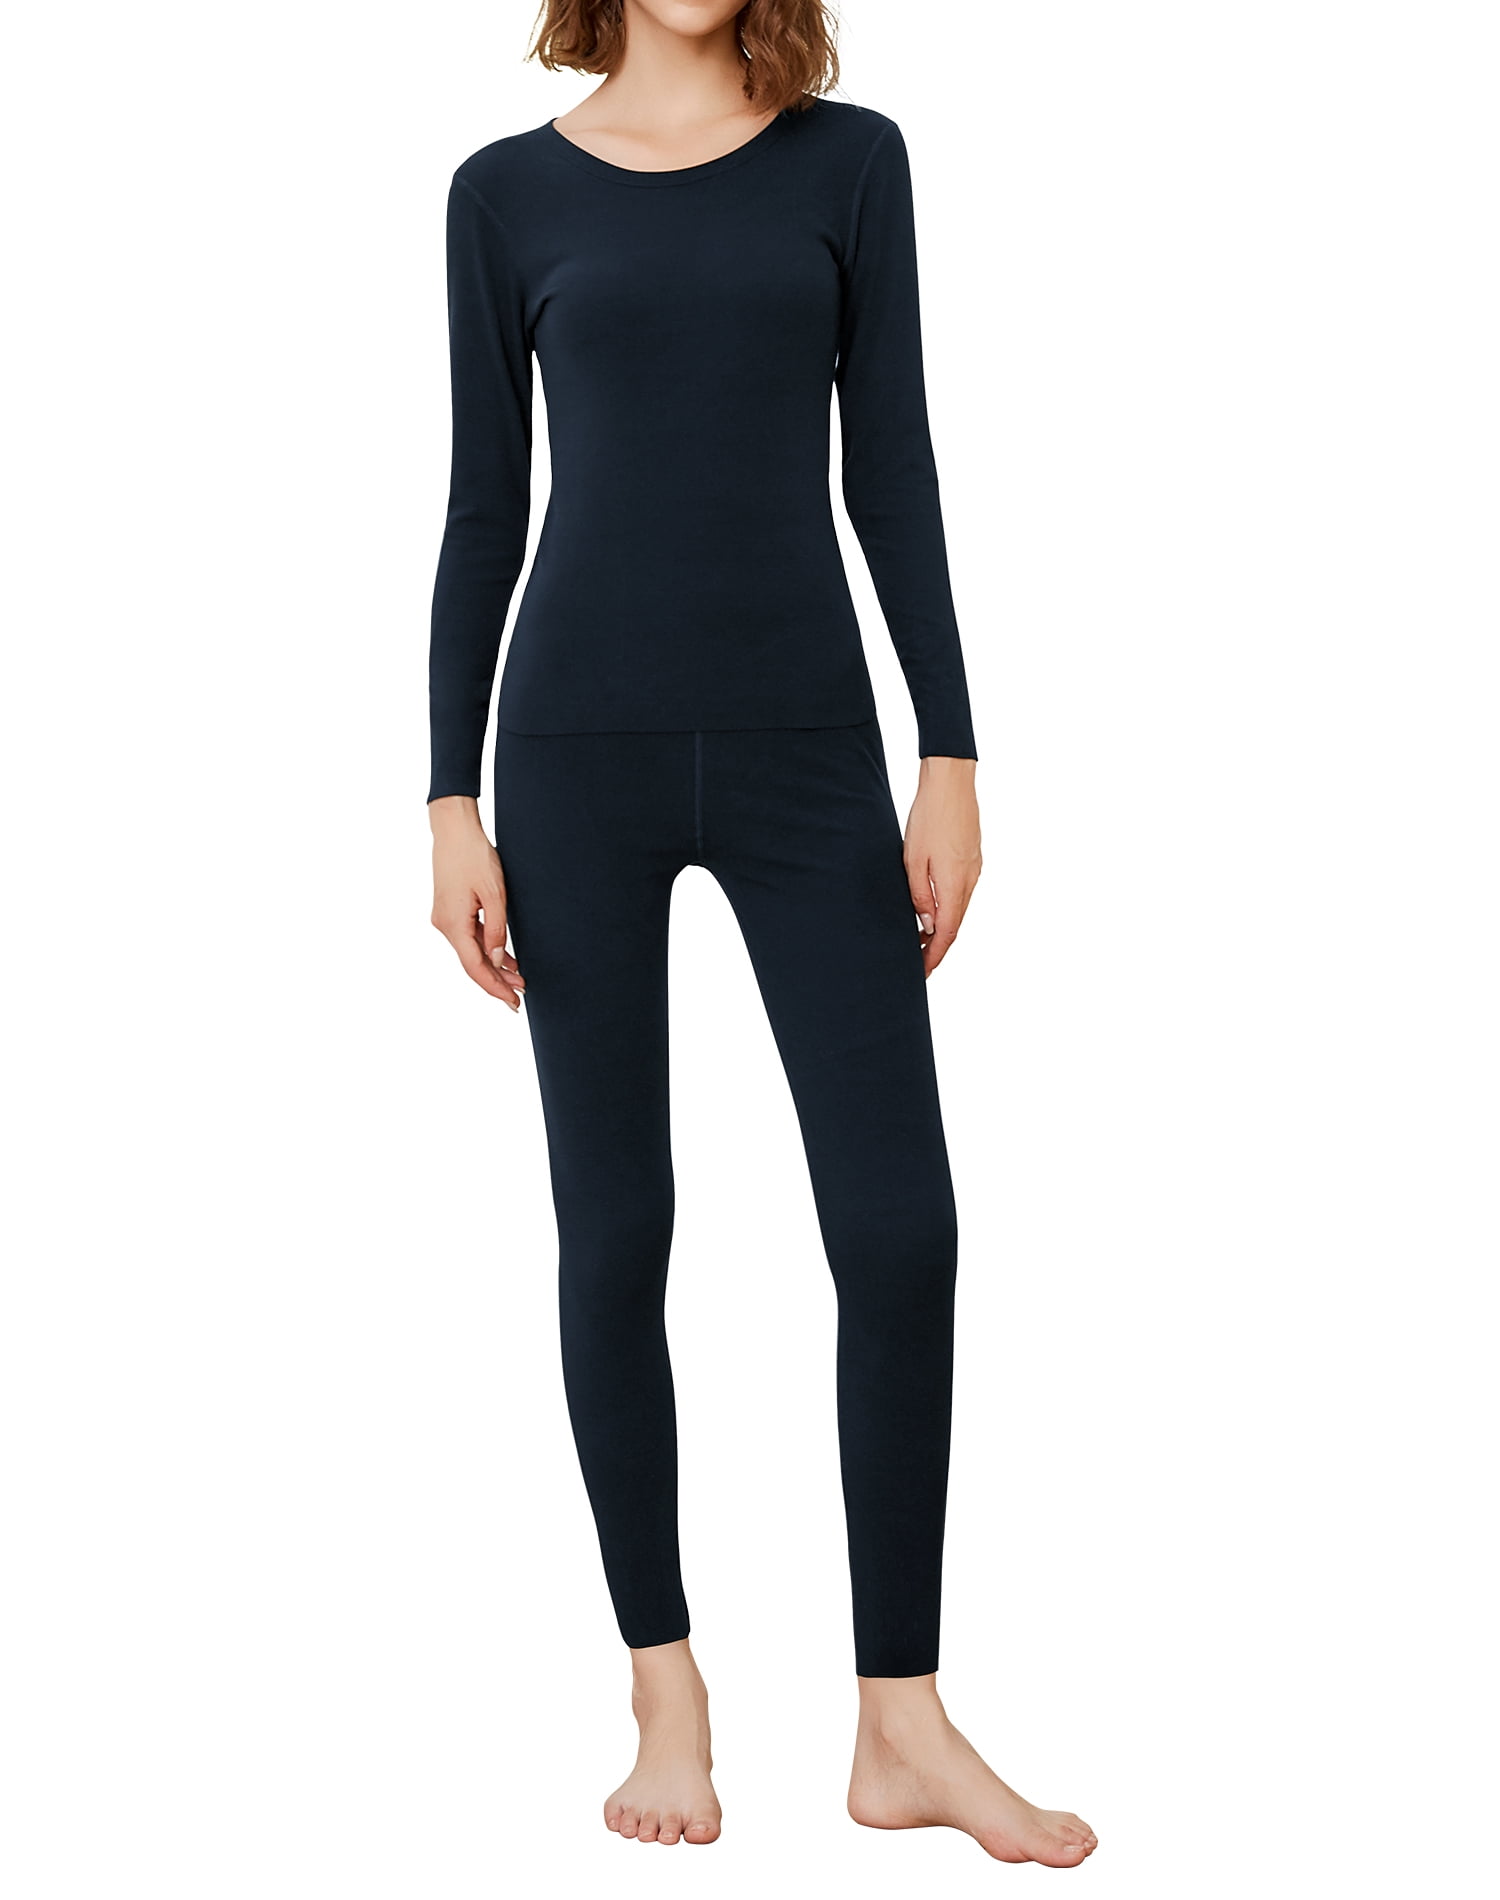 INNERSY Women's Thermal Base Layer Soft Long Johns Set Mid-Weight Ski Top &  Bottoms for Winter(L,Navy Blue) 